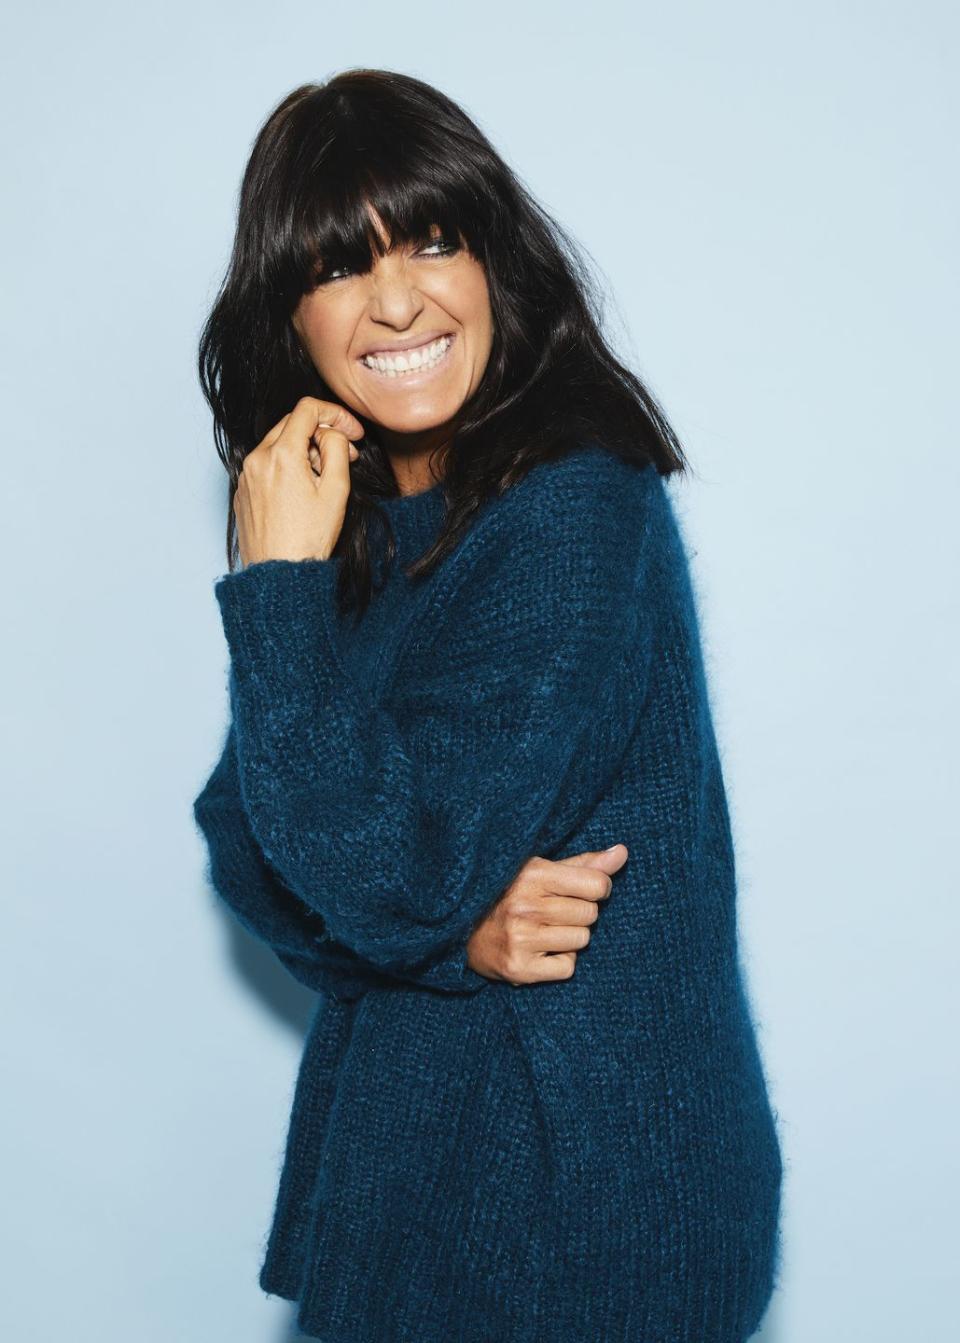 Episode 70: Claudia Winkleman on Workplace Nerves, Beauty Essentials and Embracing Failure